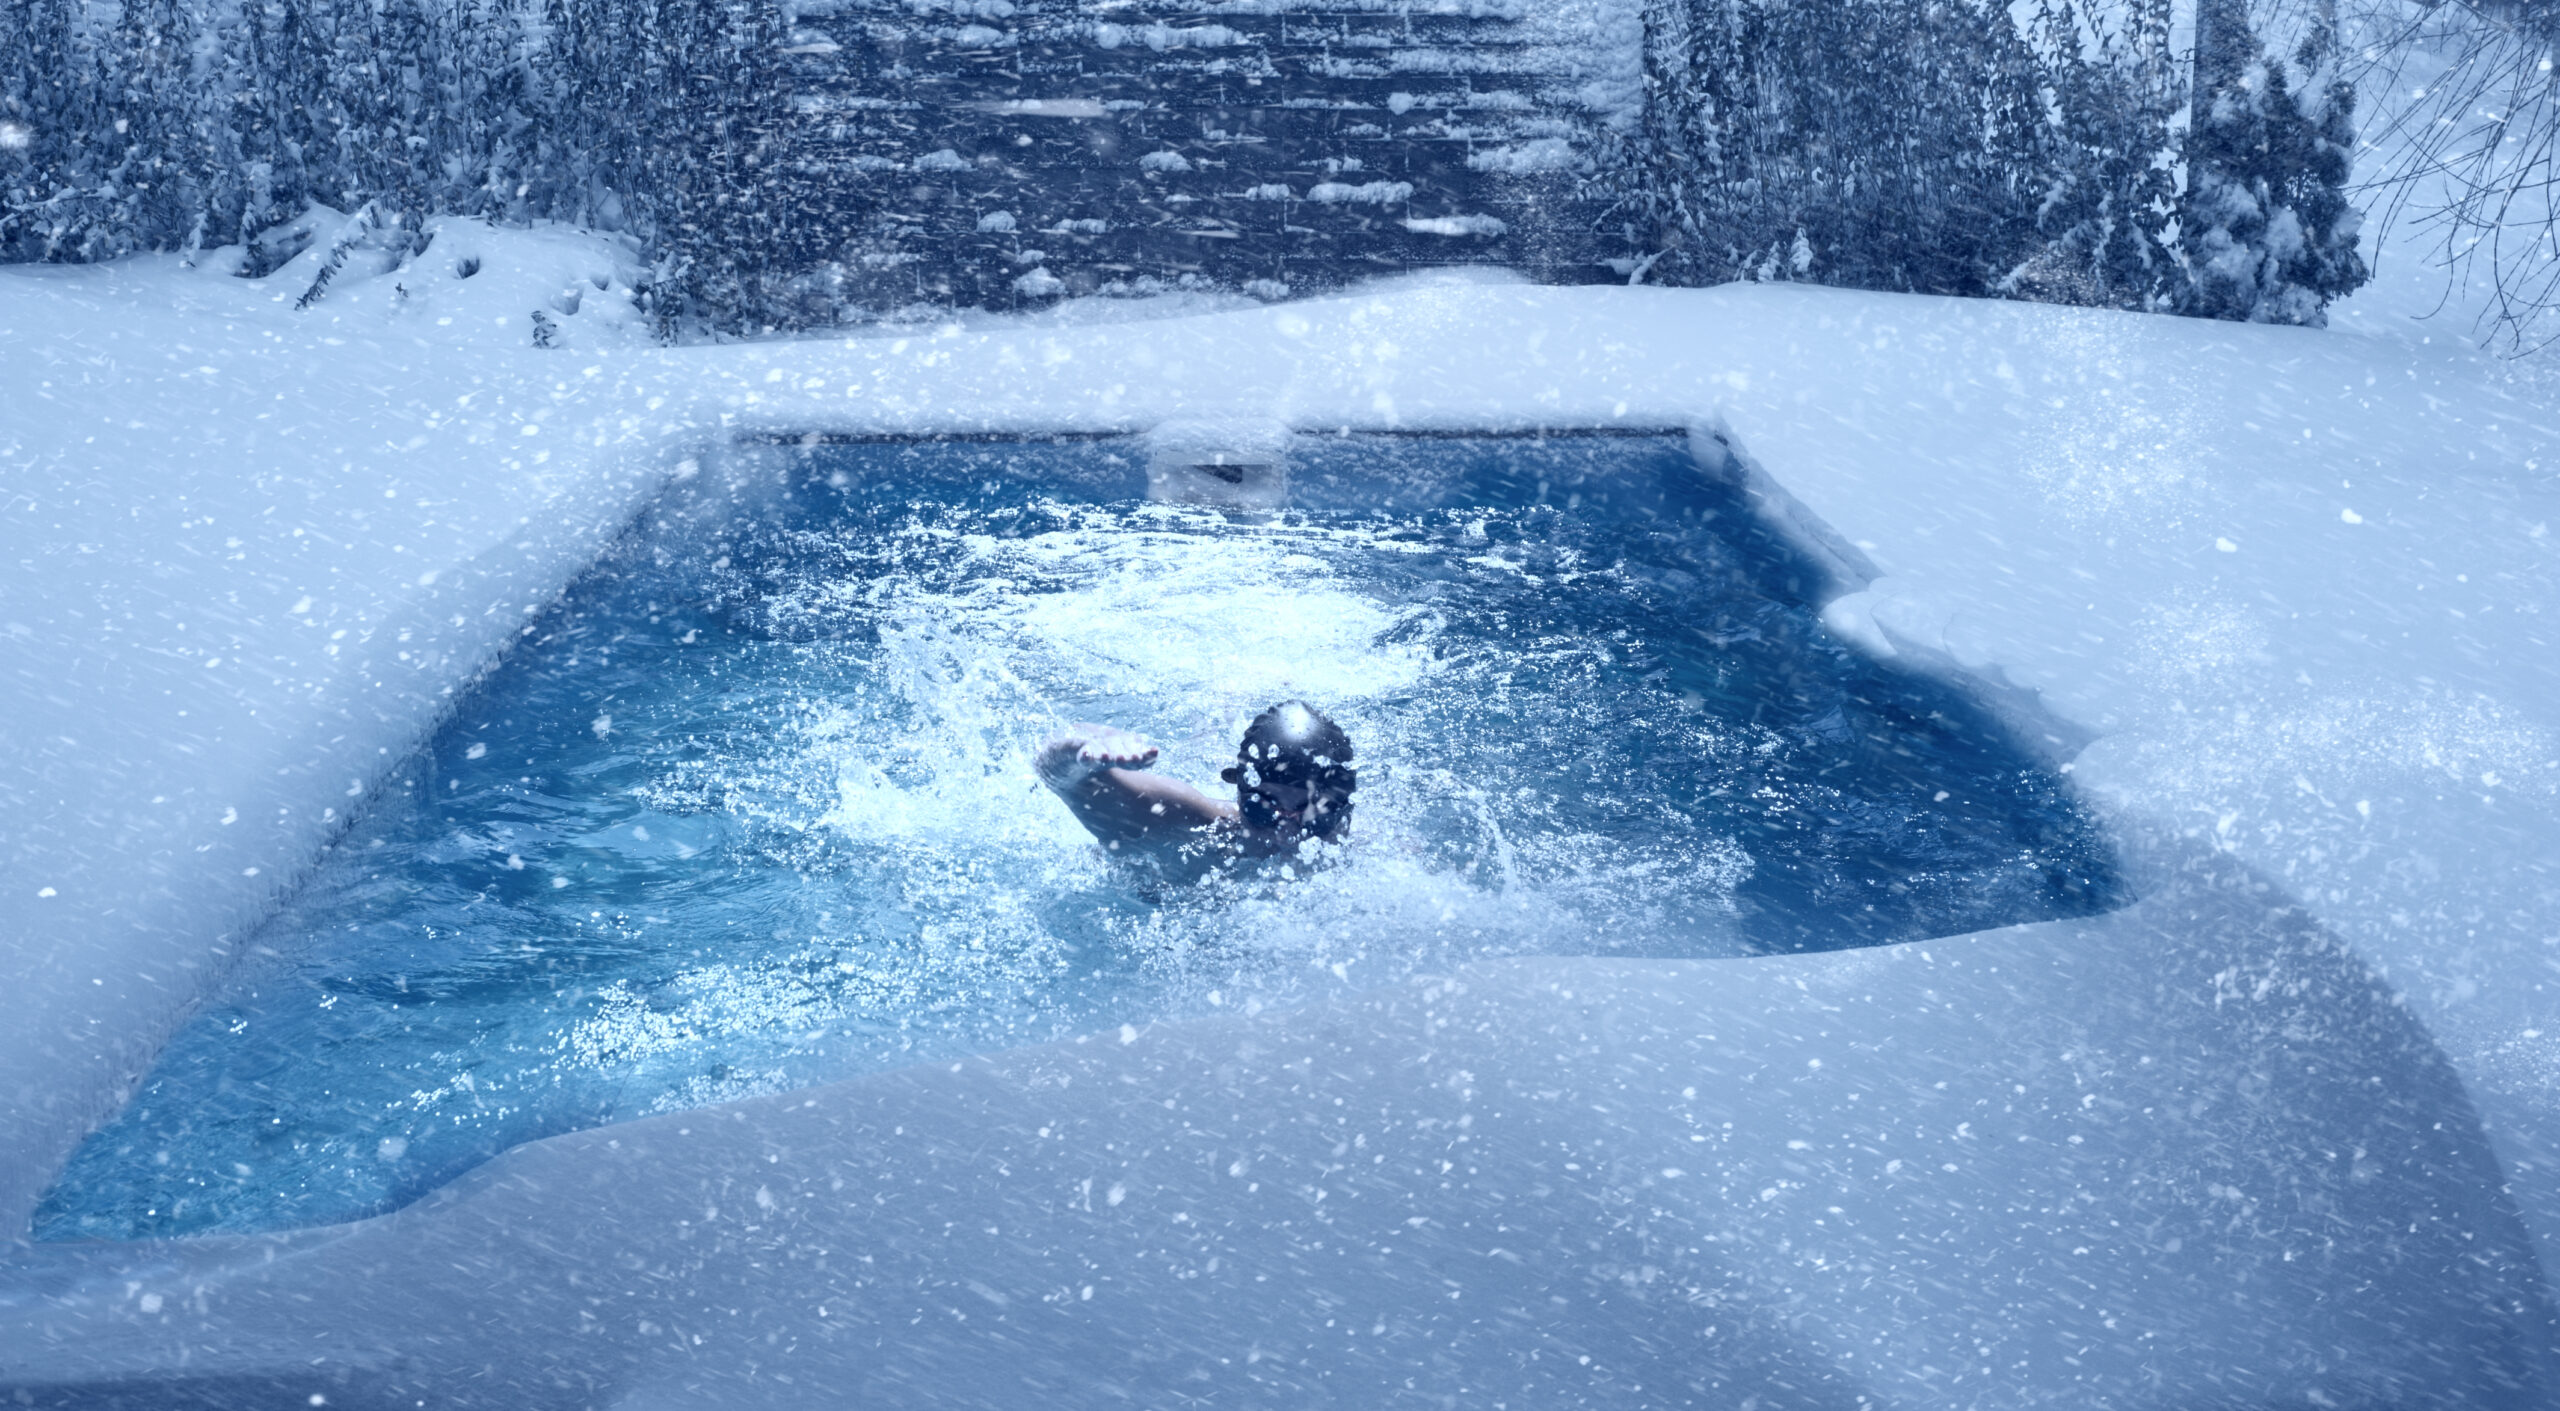 An iced swimming pool covered in a thick layer of ice and snow, revealing the winter season's harsh conditions.